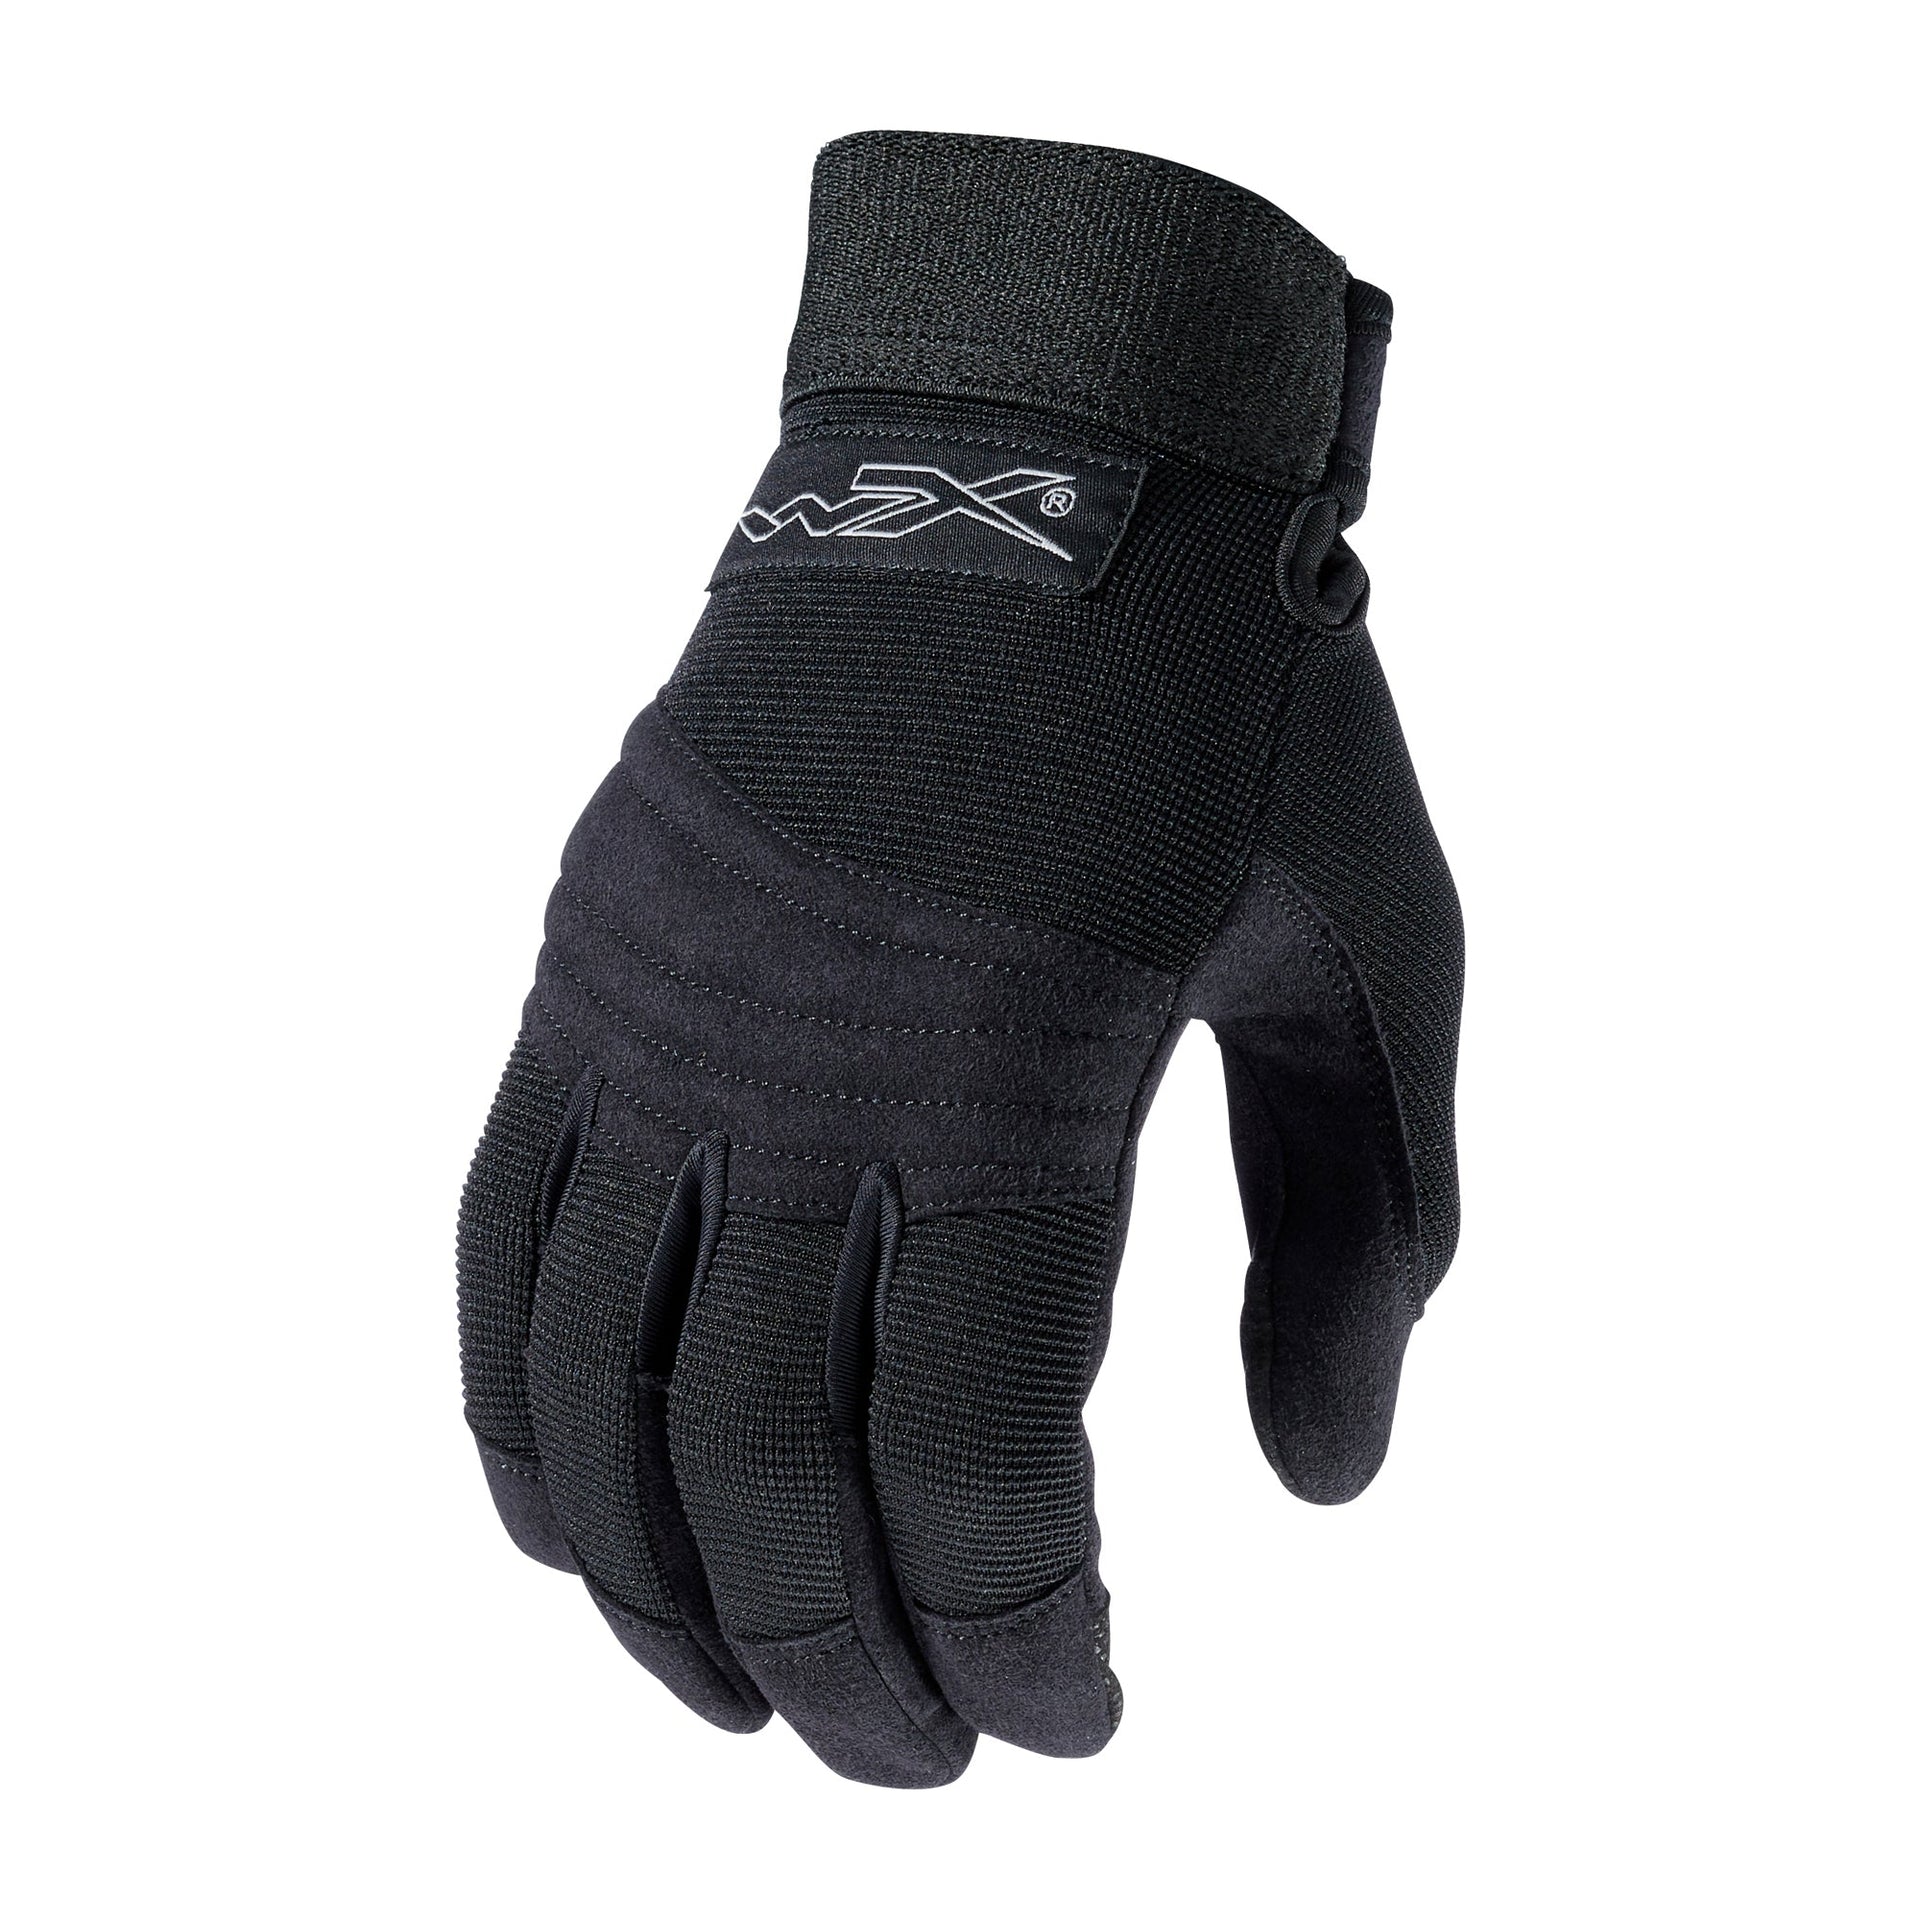 APX SmartTouch Gloves